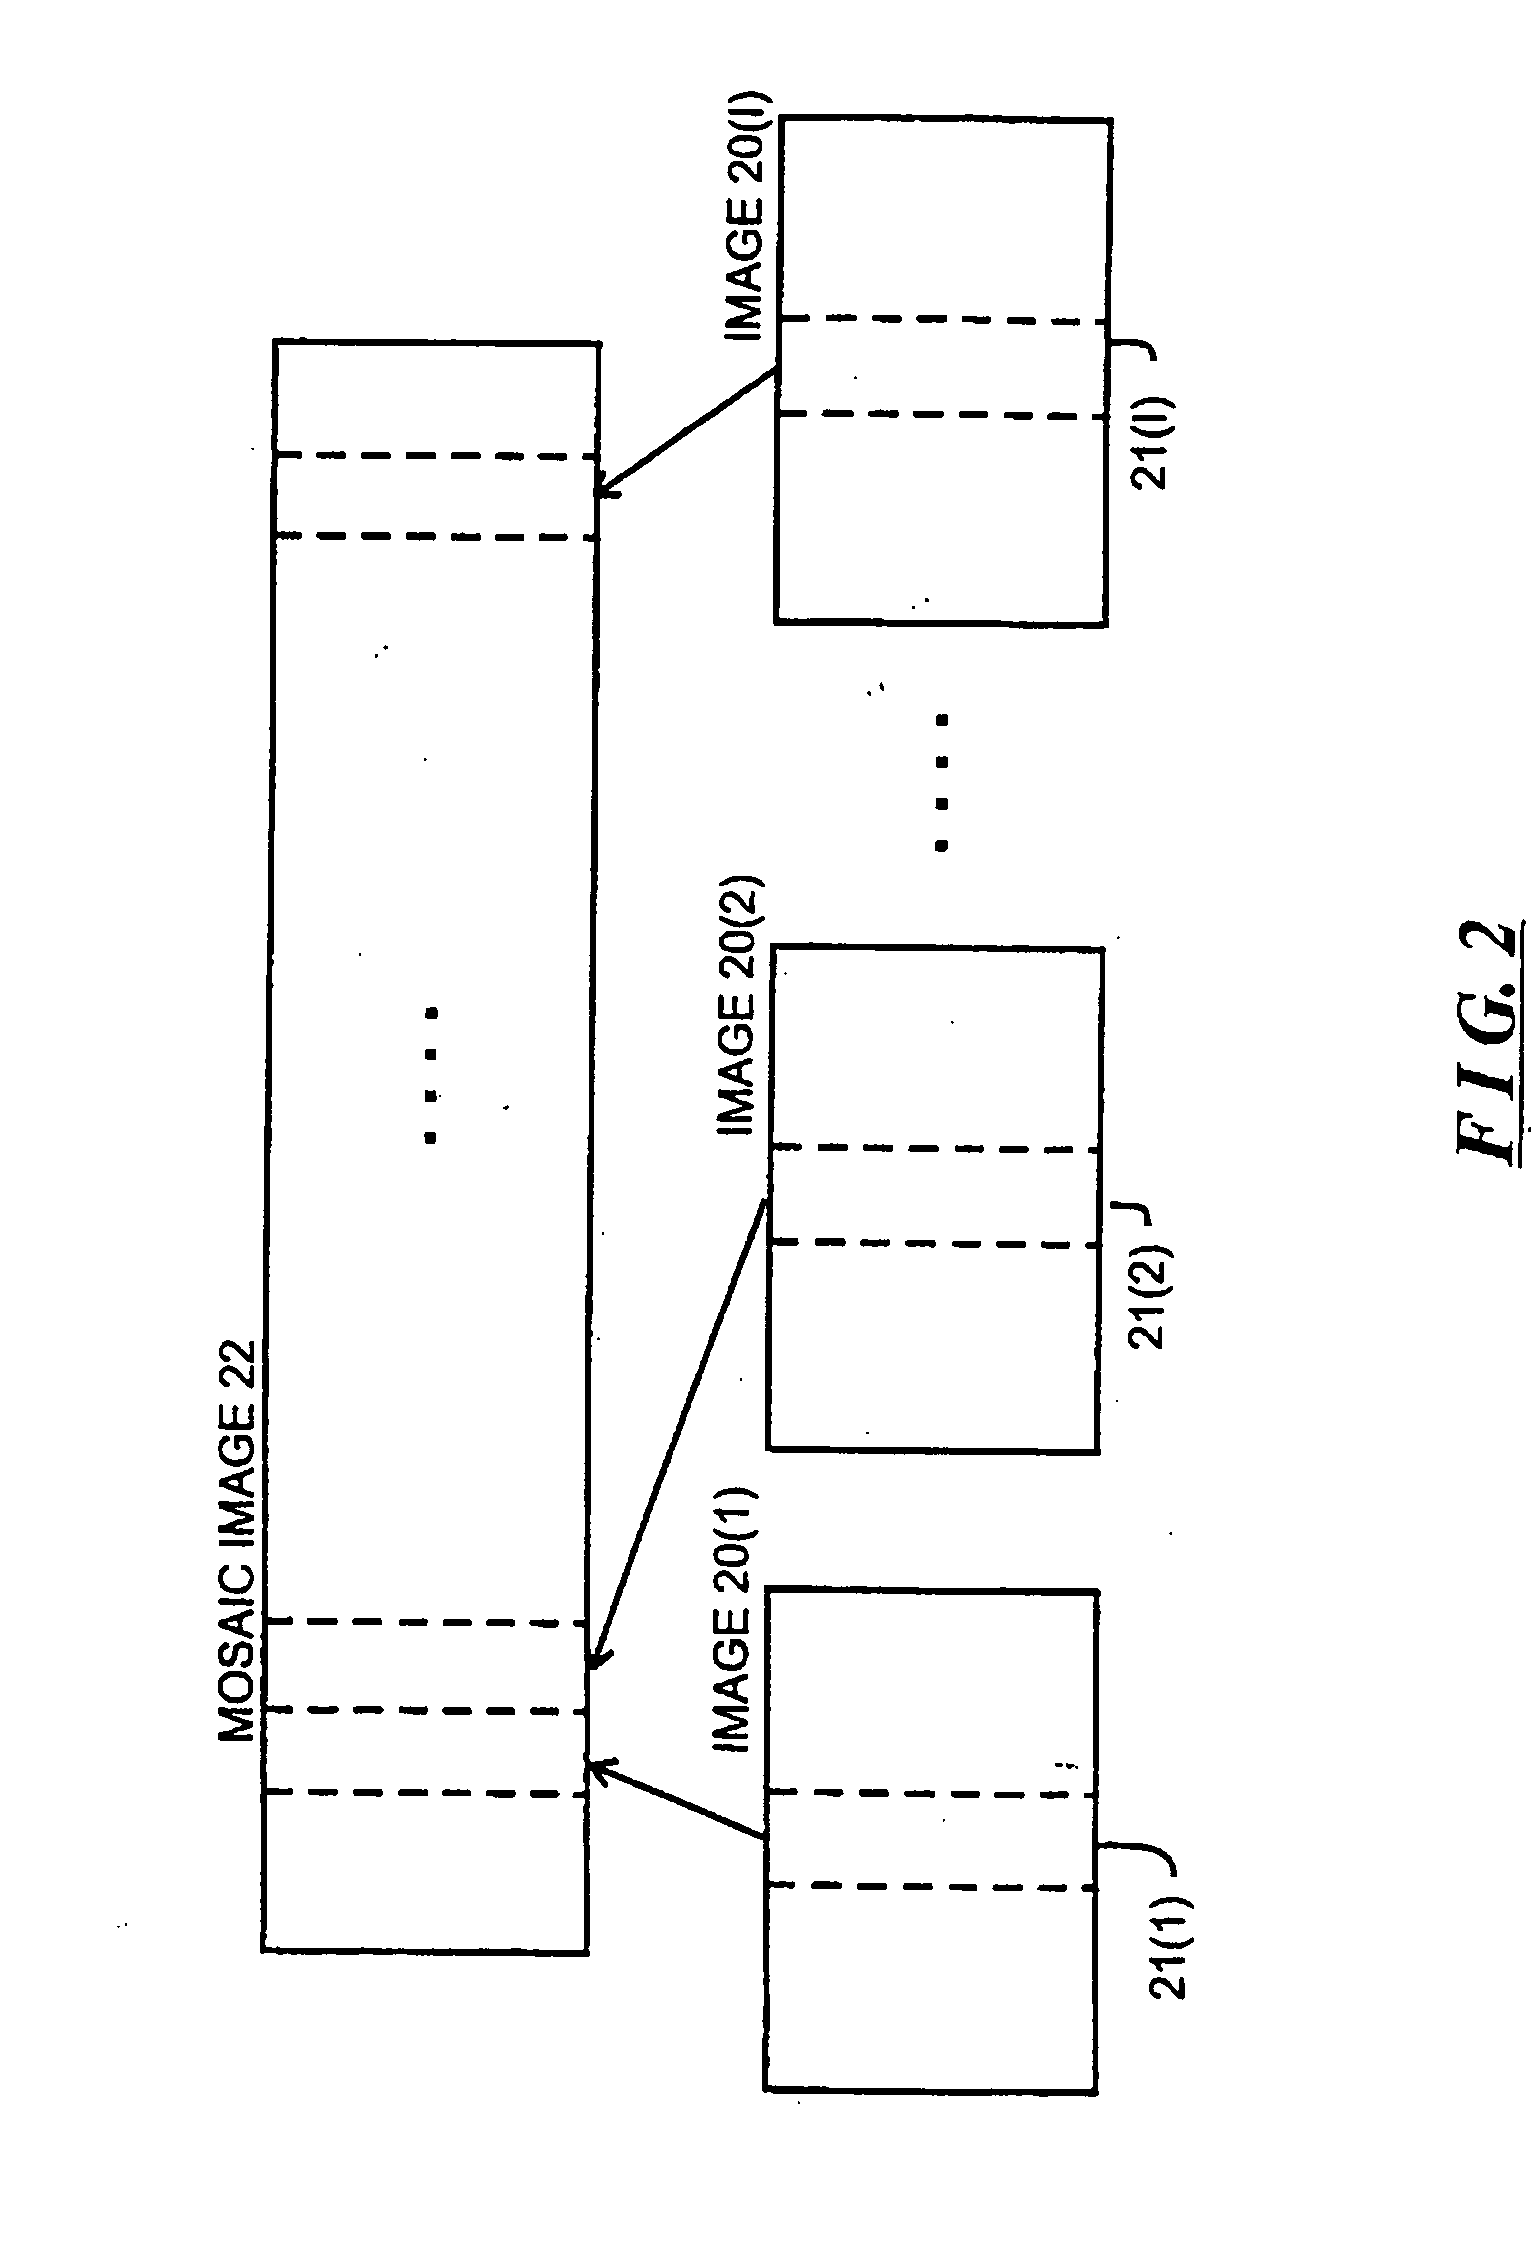 System and method for rectified mosaicing of images recorded by a moving camera